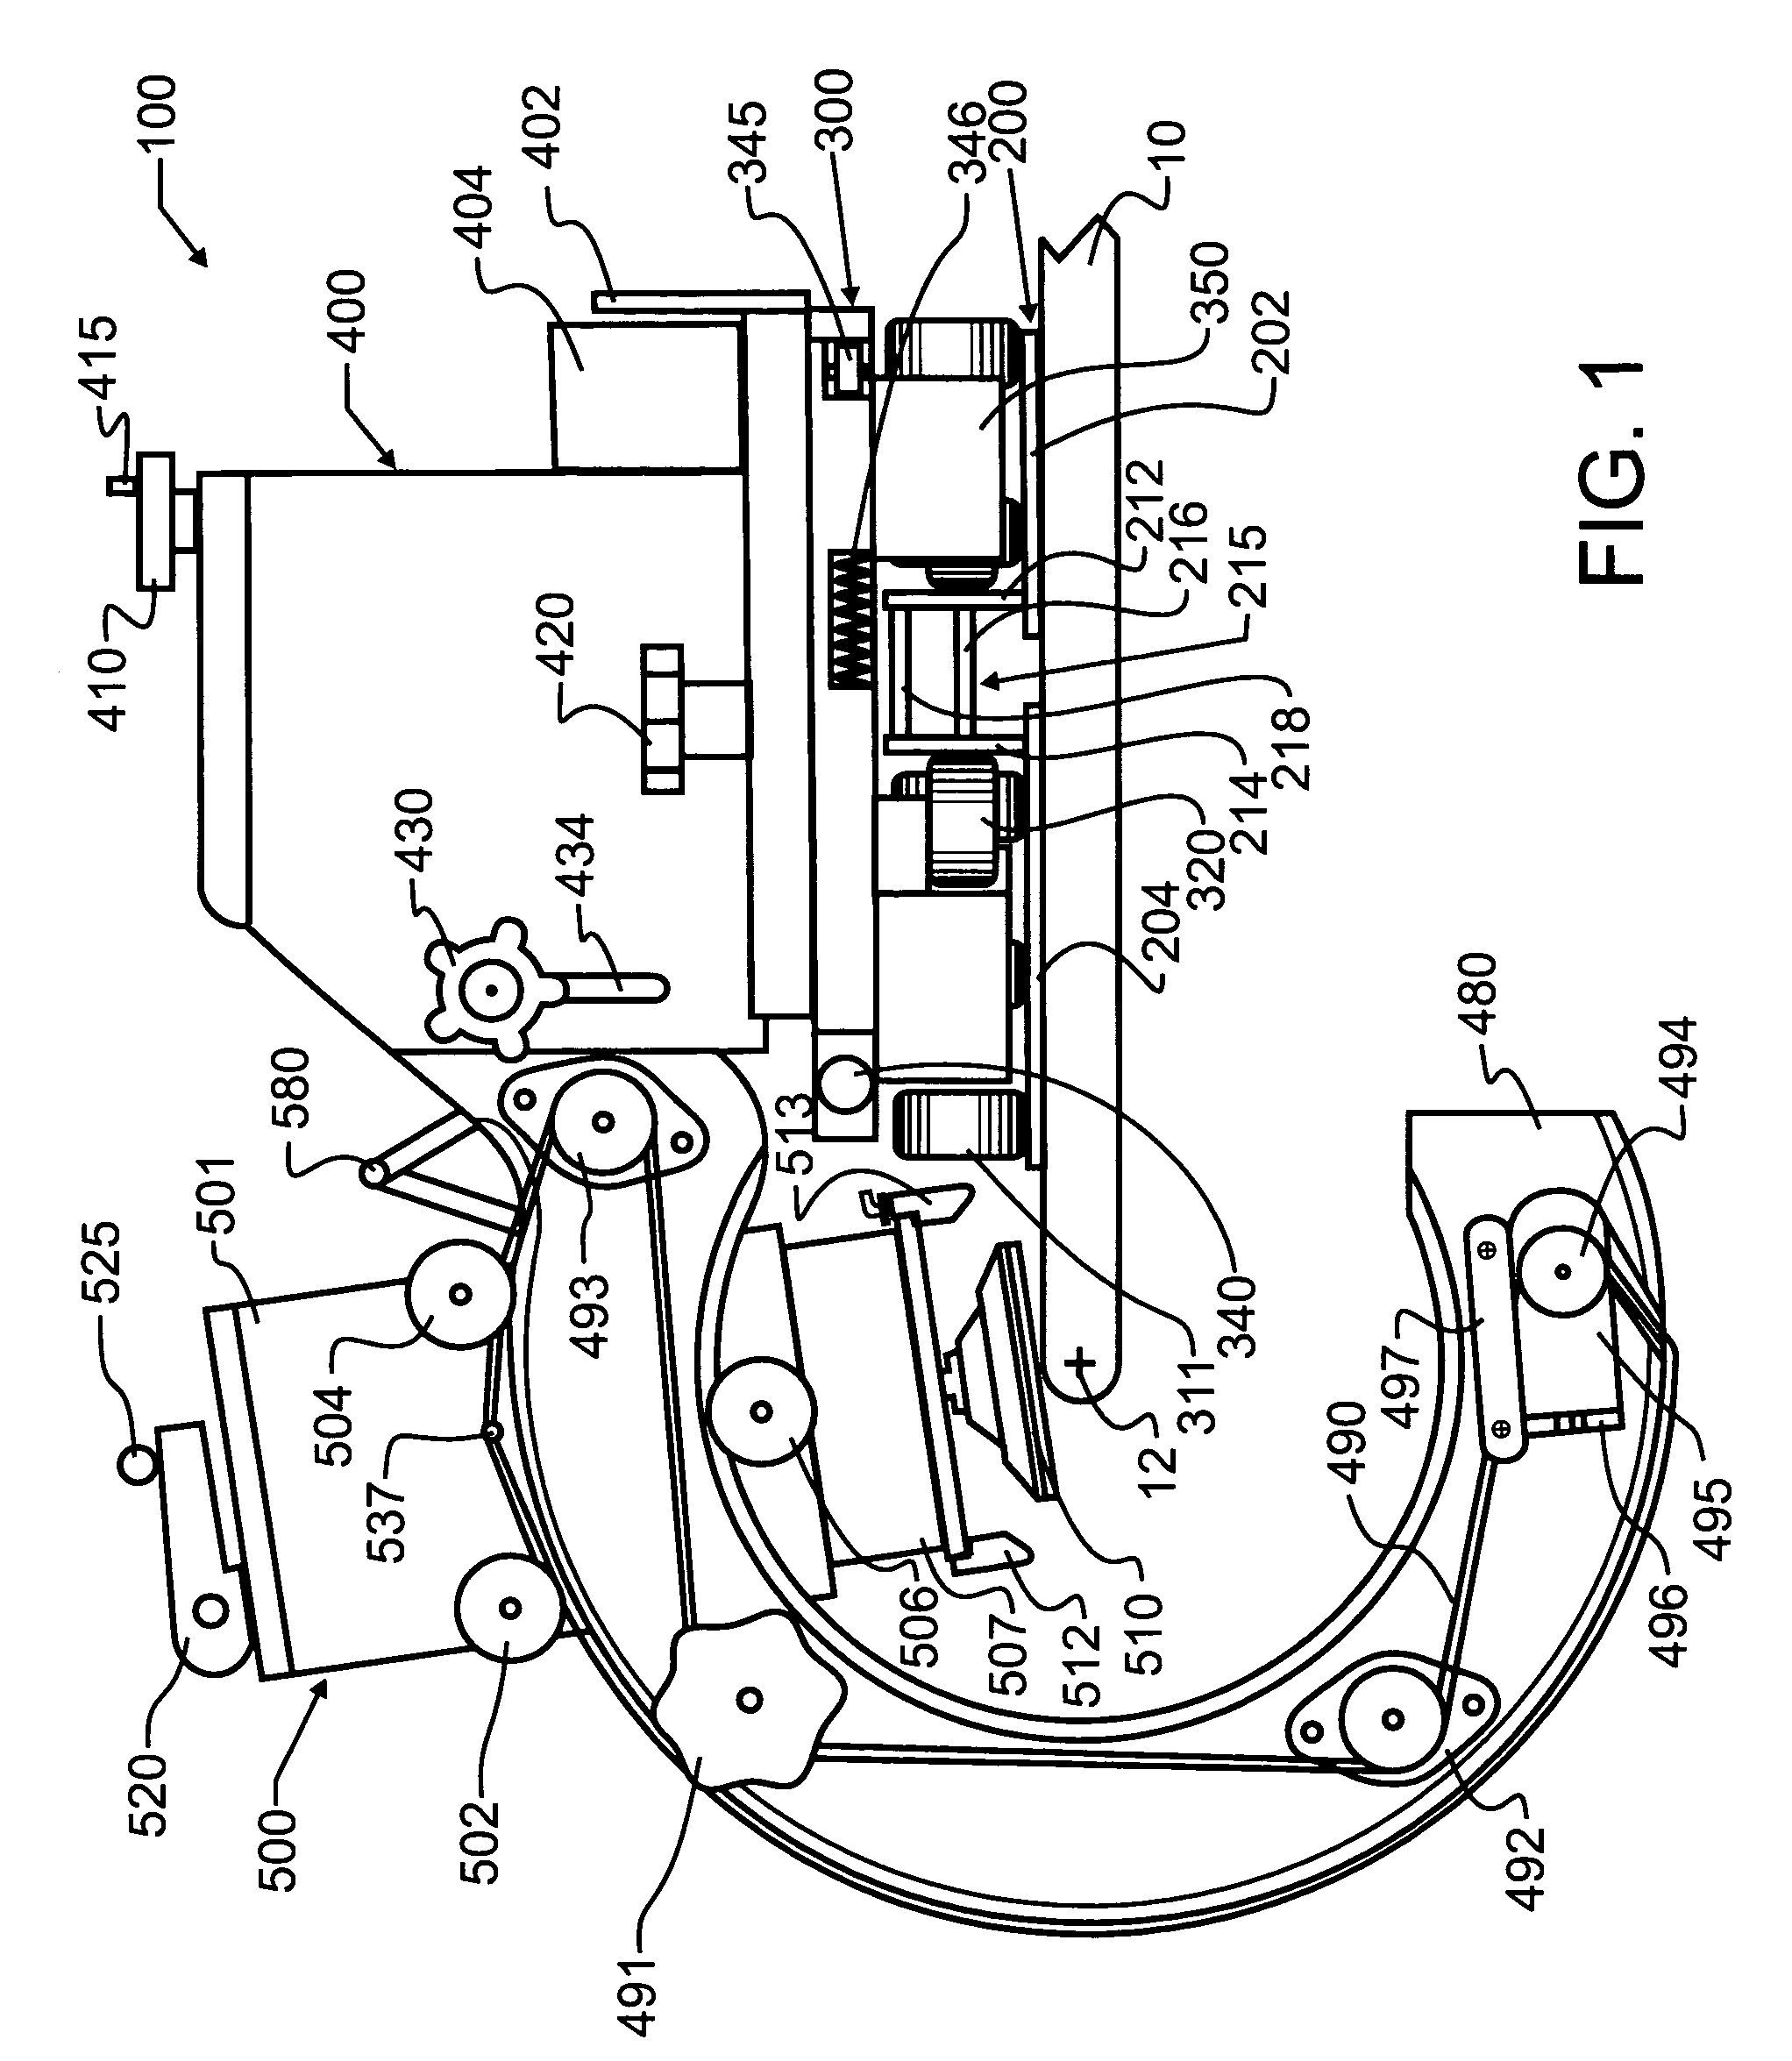 Portable apparatus for working, shaping and polishing stone and other hard materials